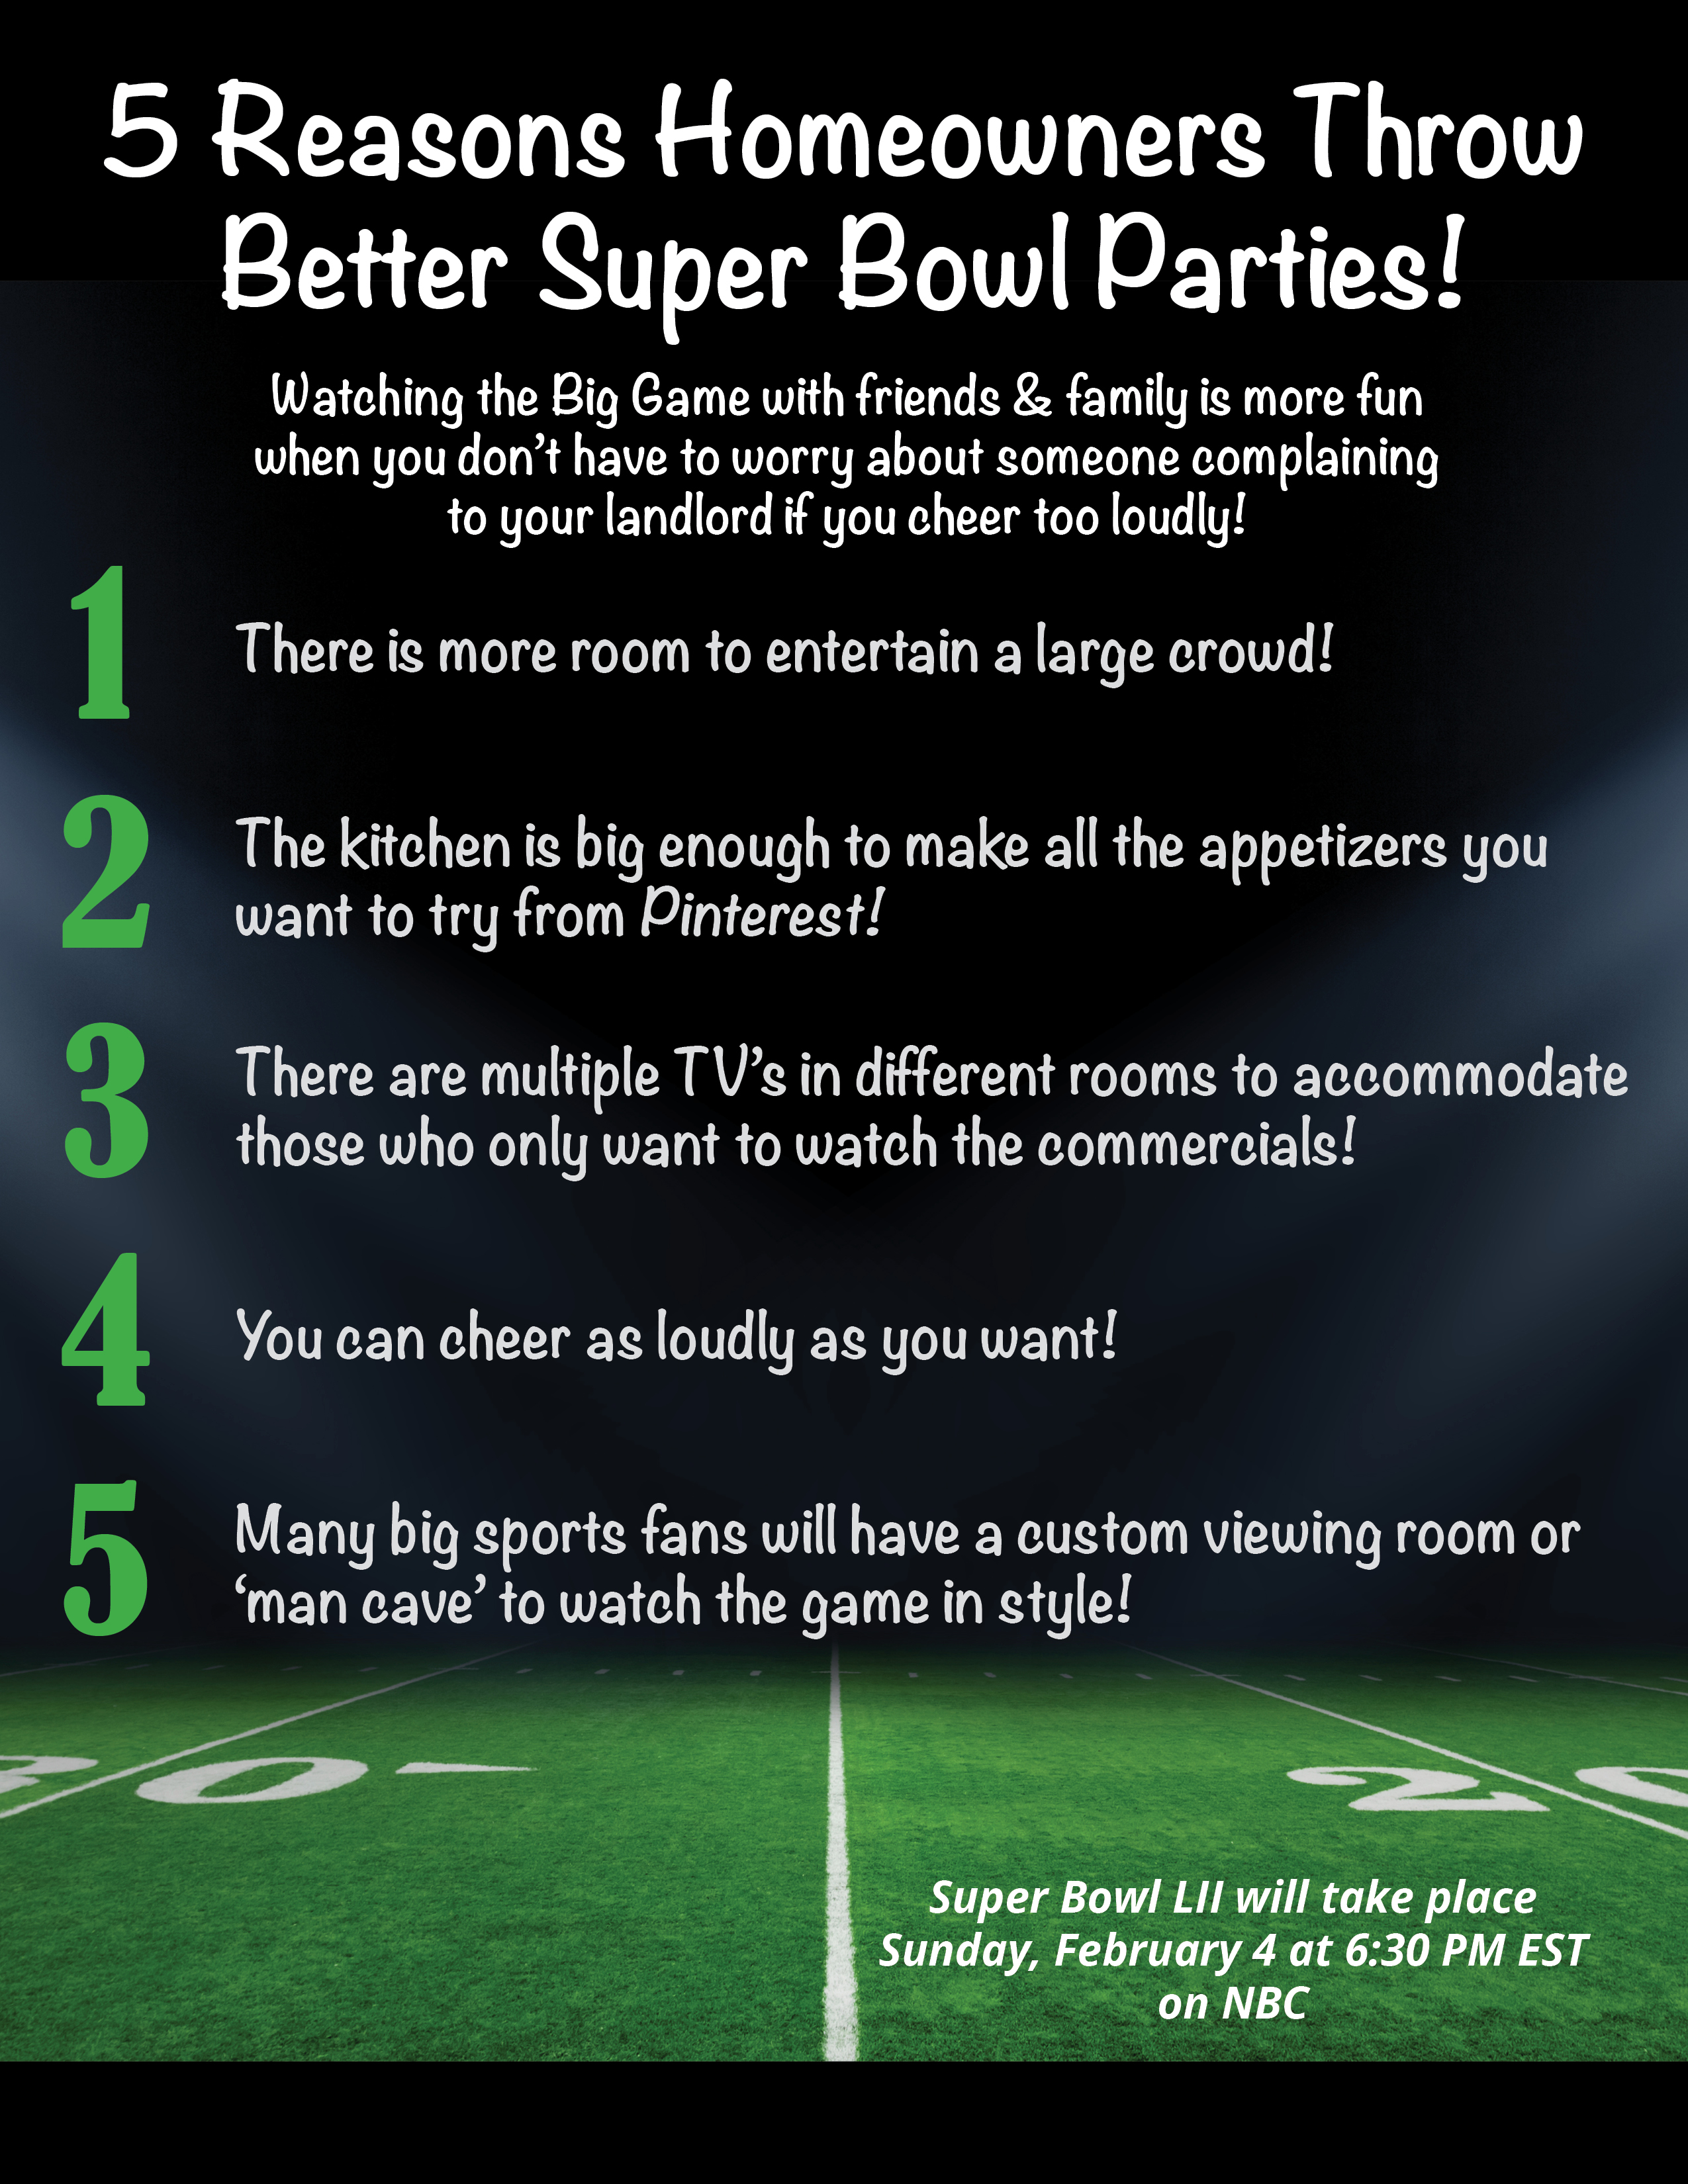 5 Reasons Homeowners Can Throw Better Super Bowl Parties! [INFOGRAPHIC] | Simplifying The Market